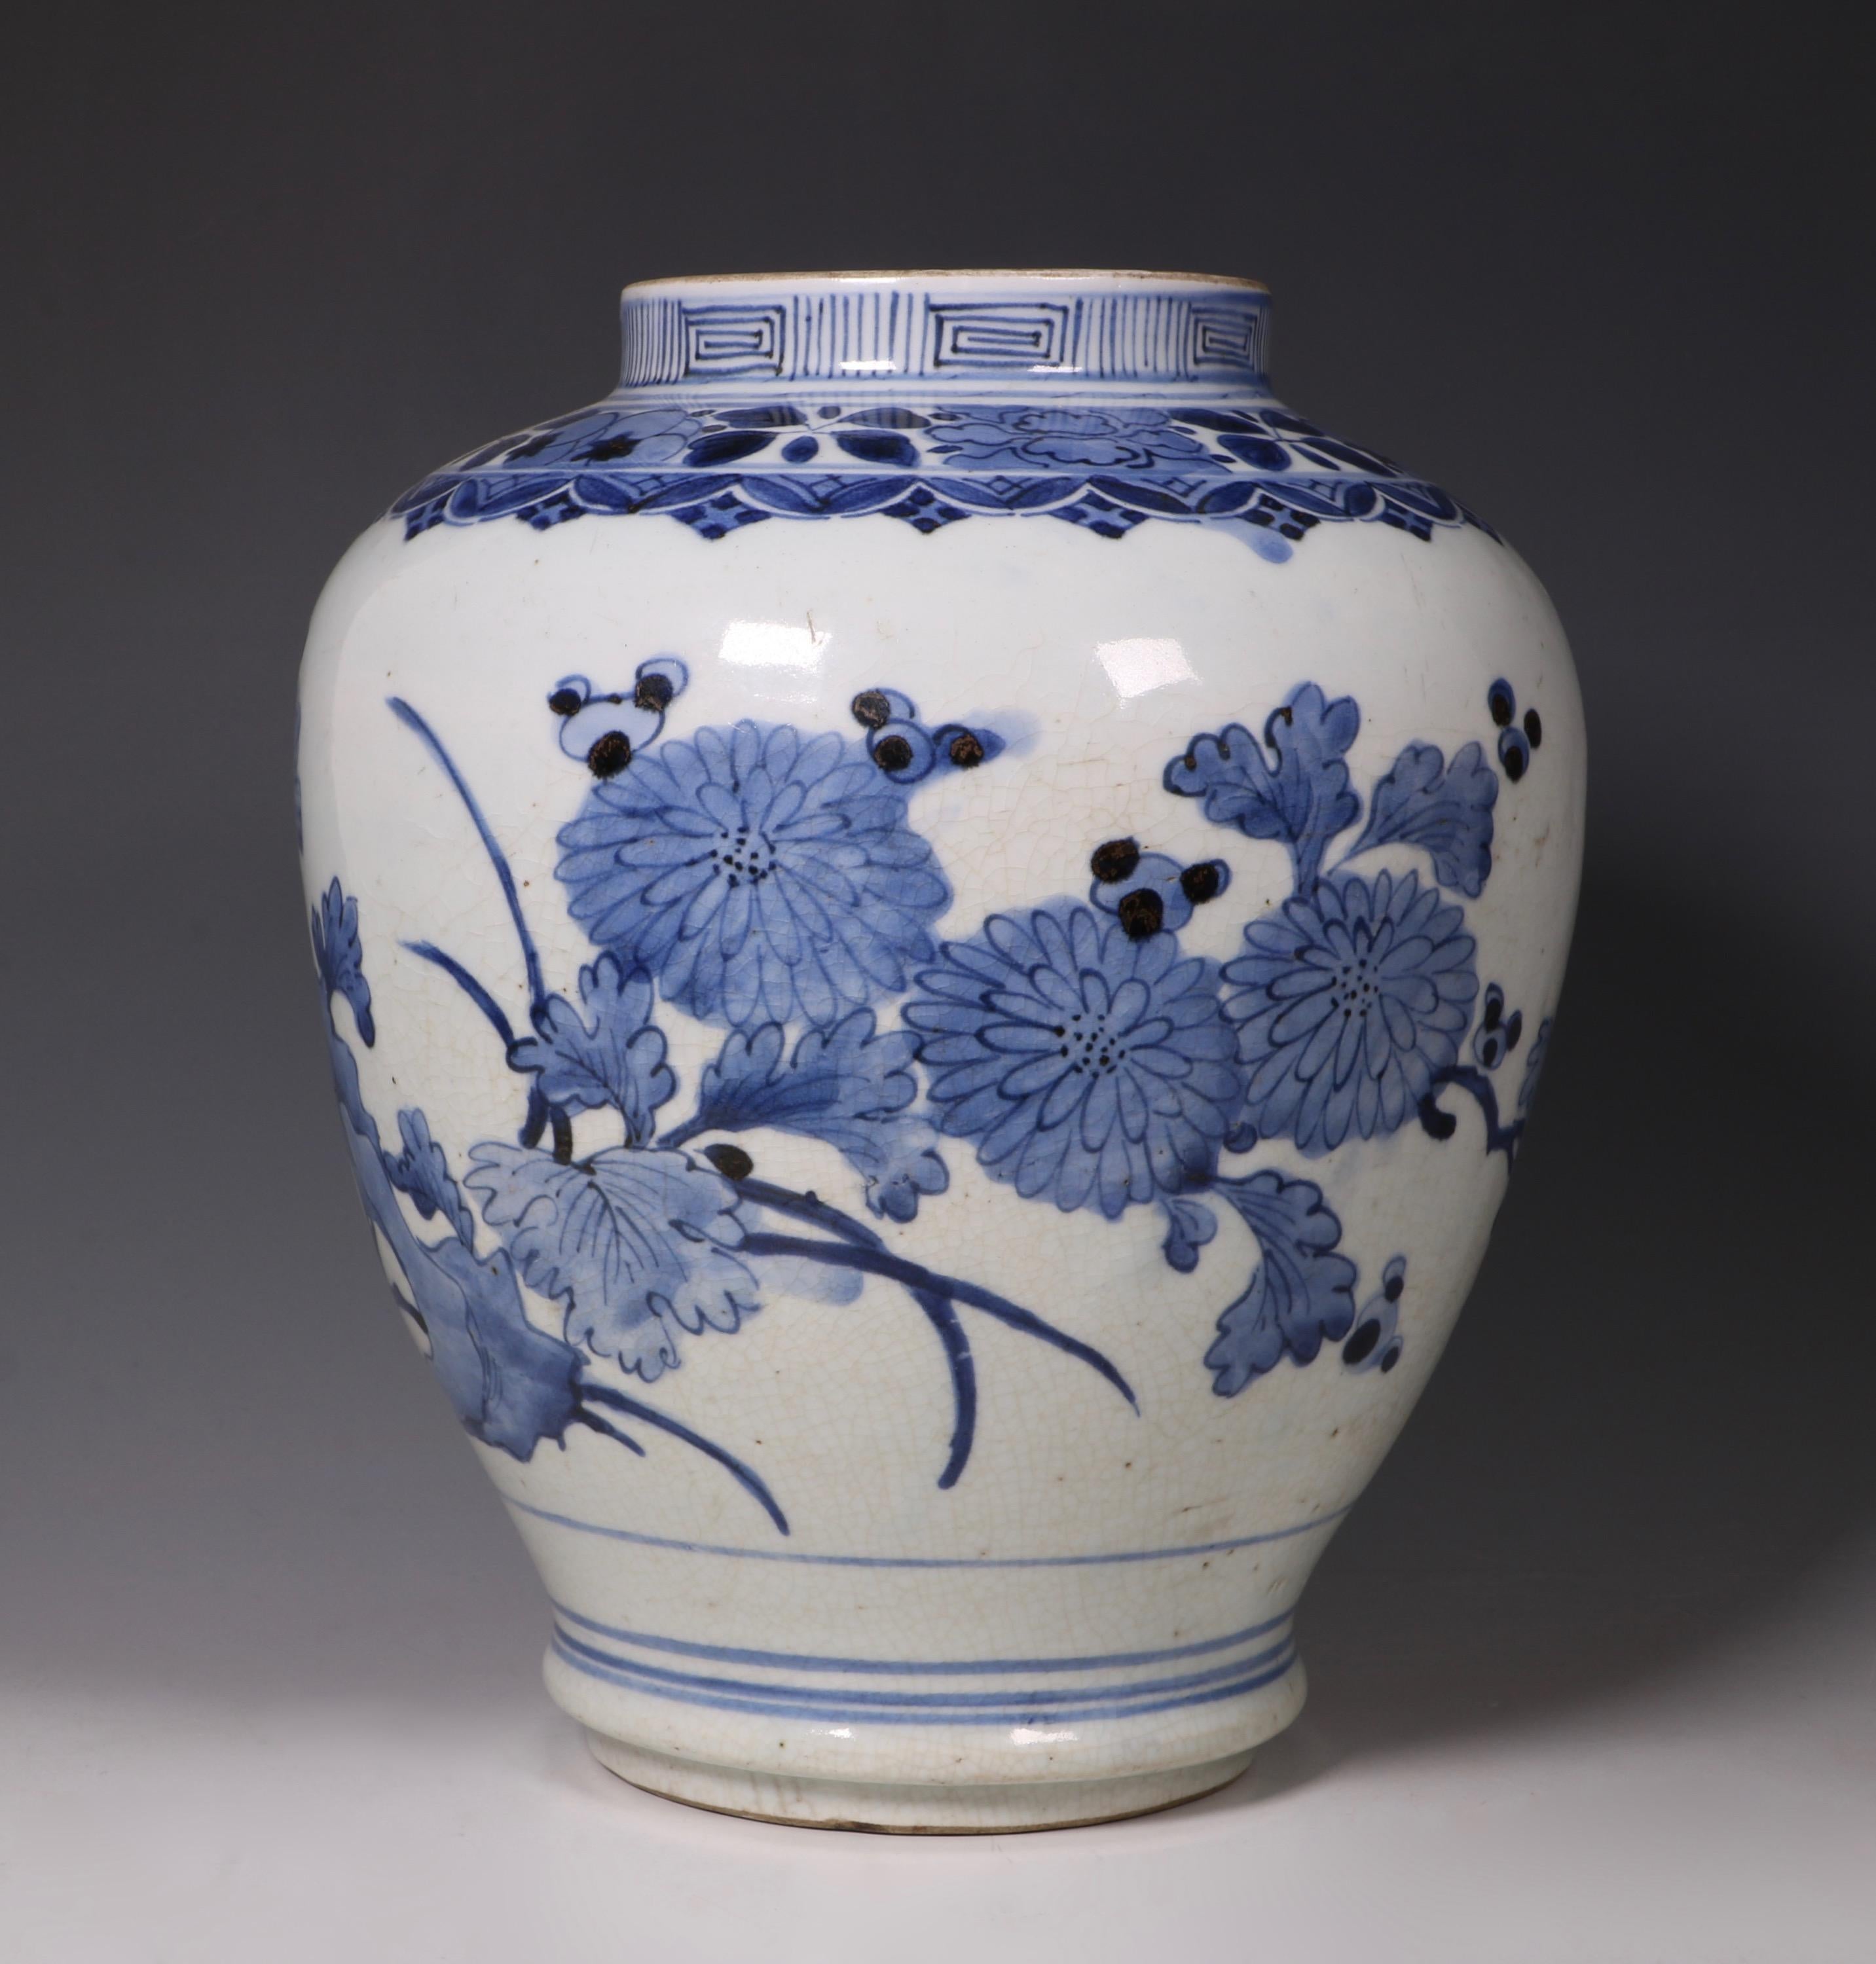 An Arita blue and white vase. Decorated with a flowering chrysanthemum issuing from rocks.

Japan ,circa 1660-1680.